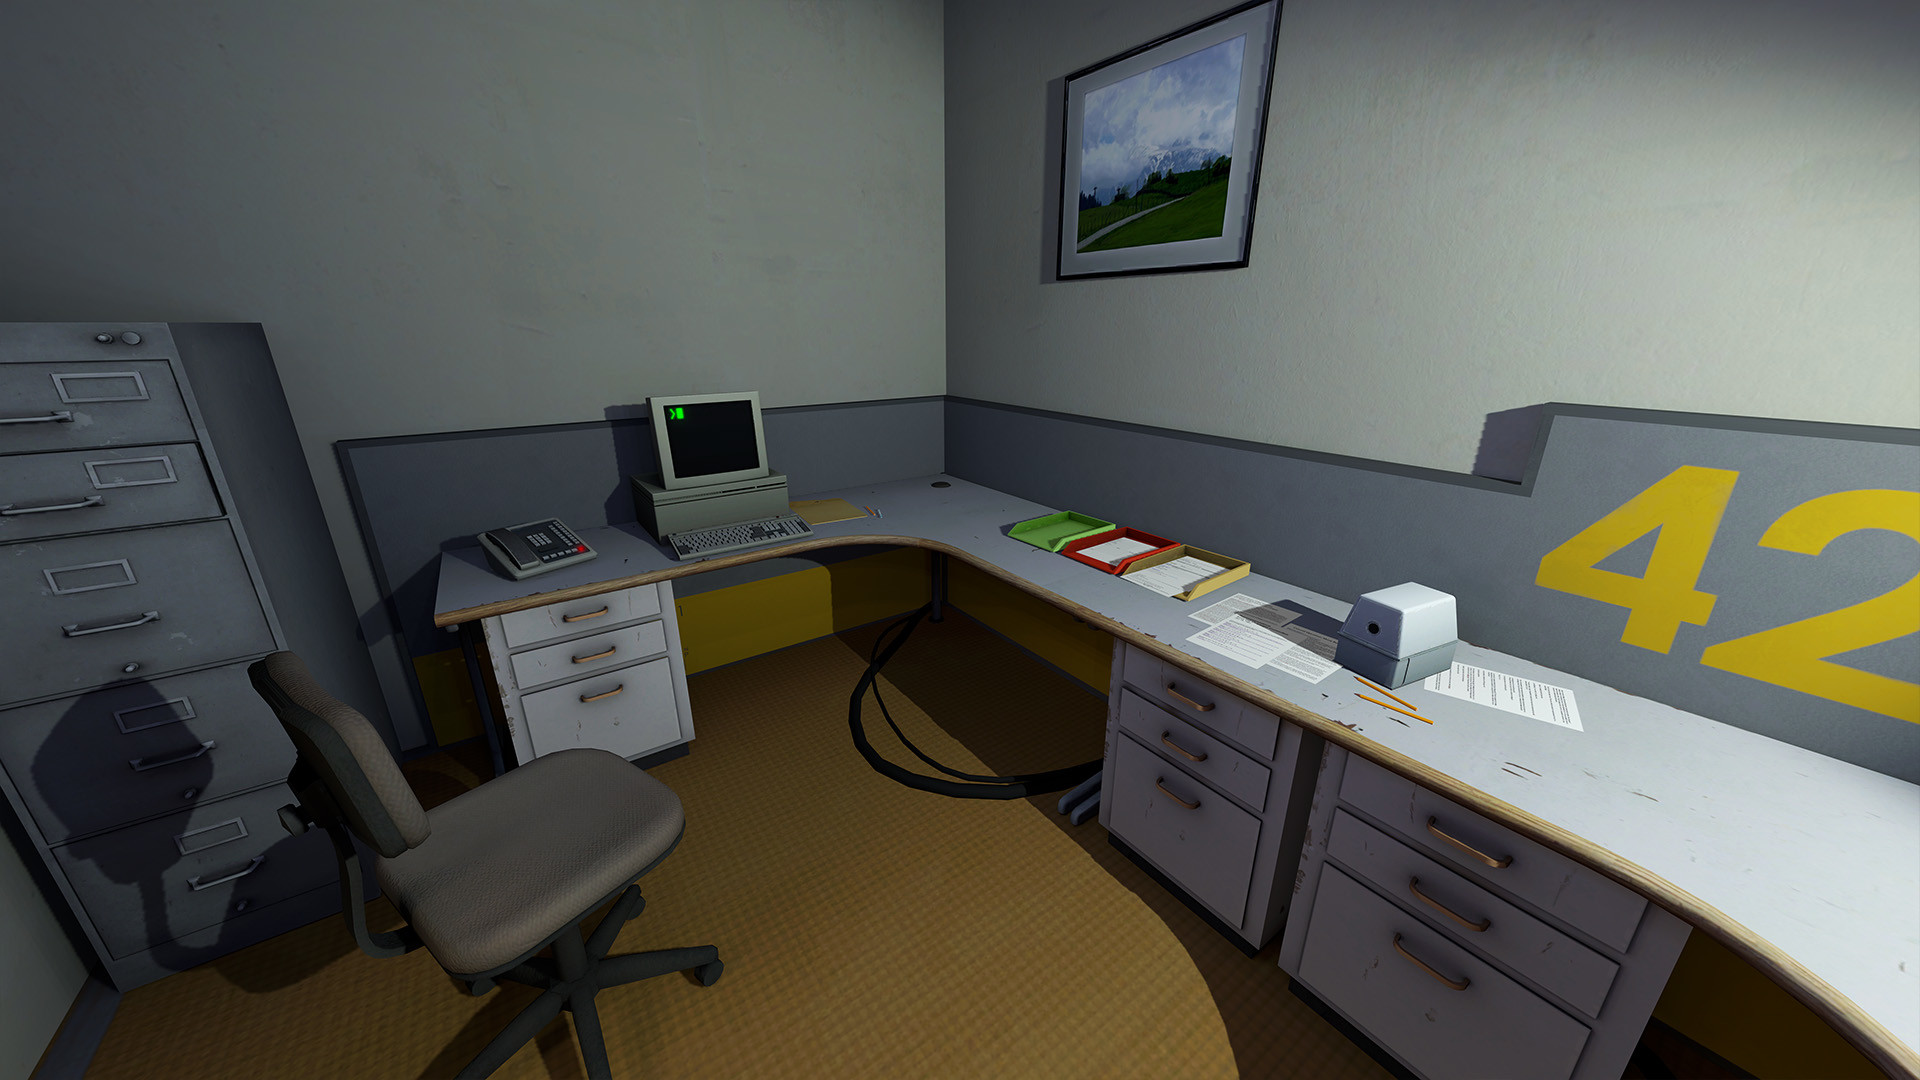 The Stanley Parable: Ultra Deluxe on Steam